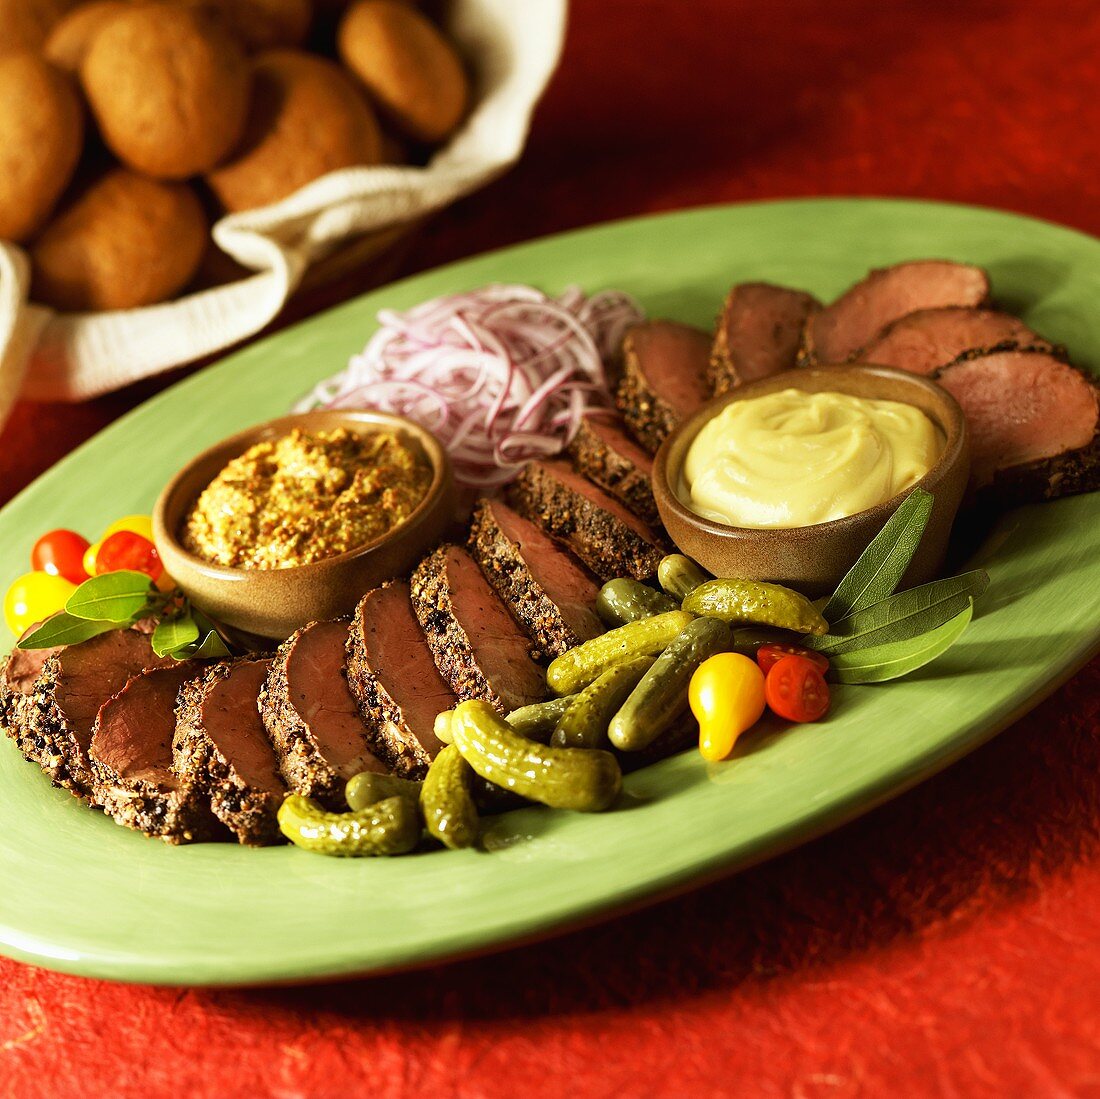 Sliced Beef Tenderloin on a Platter with Remoulade and Mustard Sauces